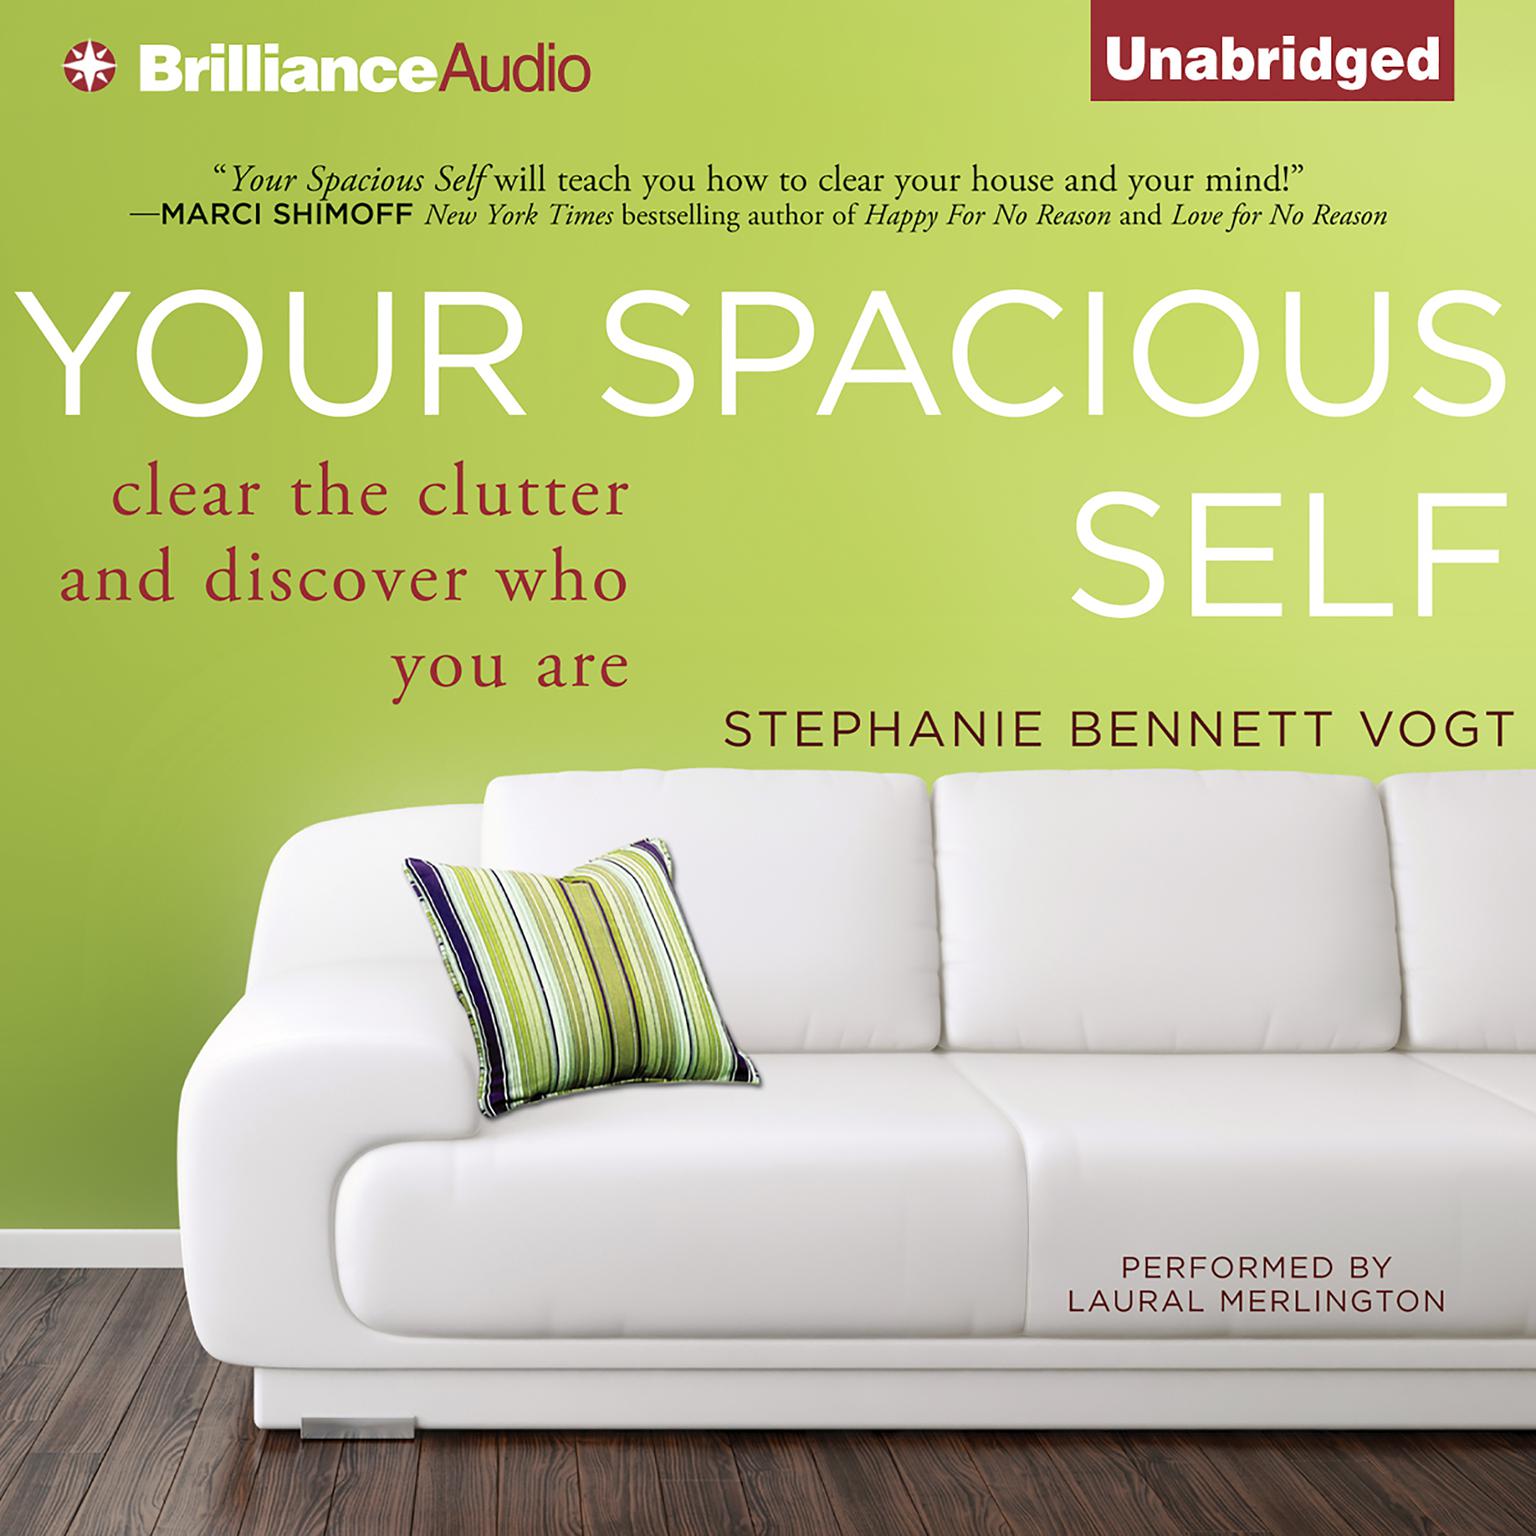 Your Spacious Self: Clear the Clutter and Discover Who You Are Audiobook, by Stephanie Bennett Vogt